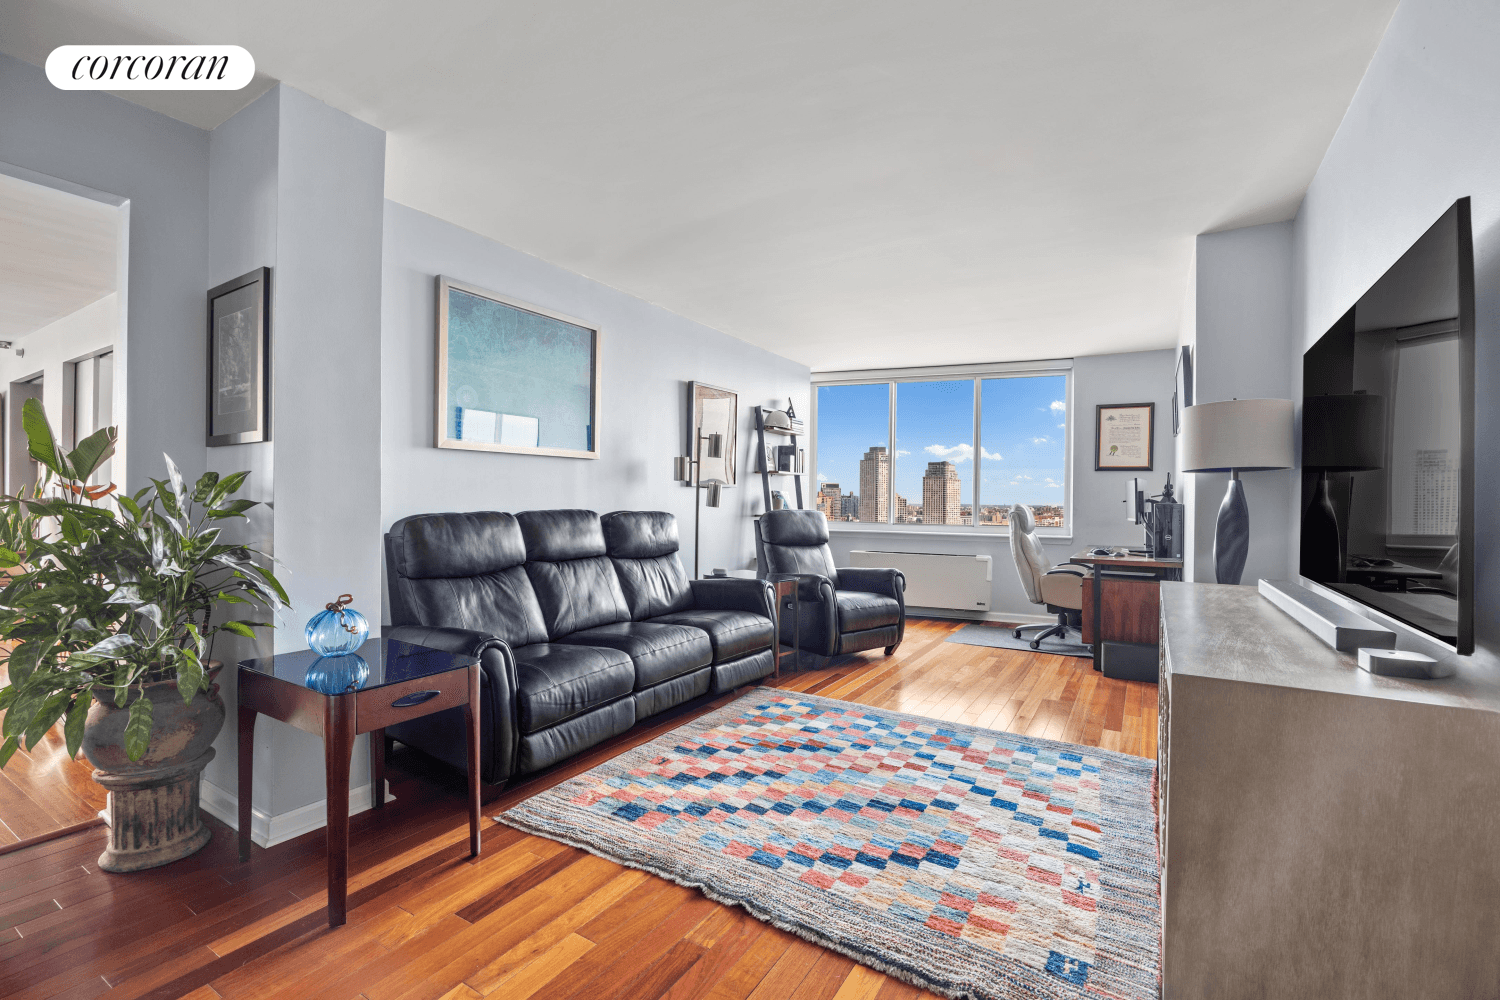 As you step through the door of Unit 29F G at Citylights, an abundance of natural light welcomes you, streaming through multiple oversized windows and enriching the warm tones of ...